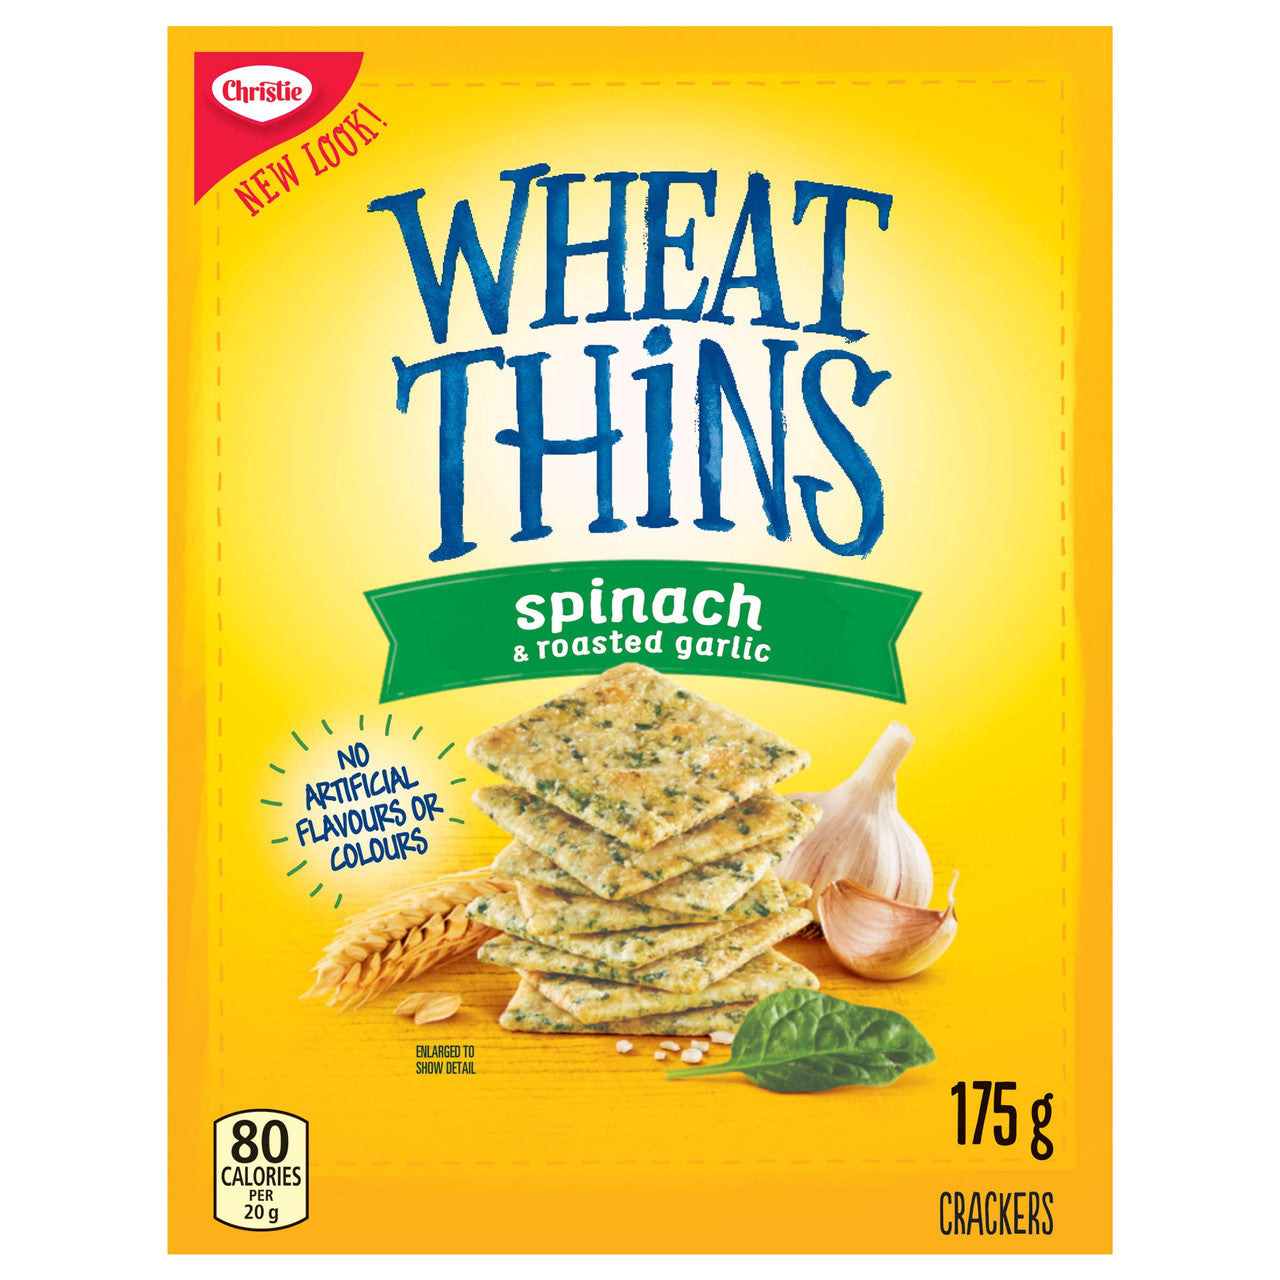 Christie Wheat Thins Spinach & Roasted Garlic Crackers, 175g/6.2 oz., (Imported from Canada}